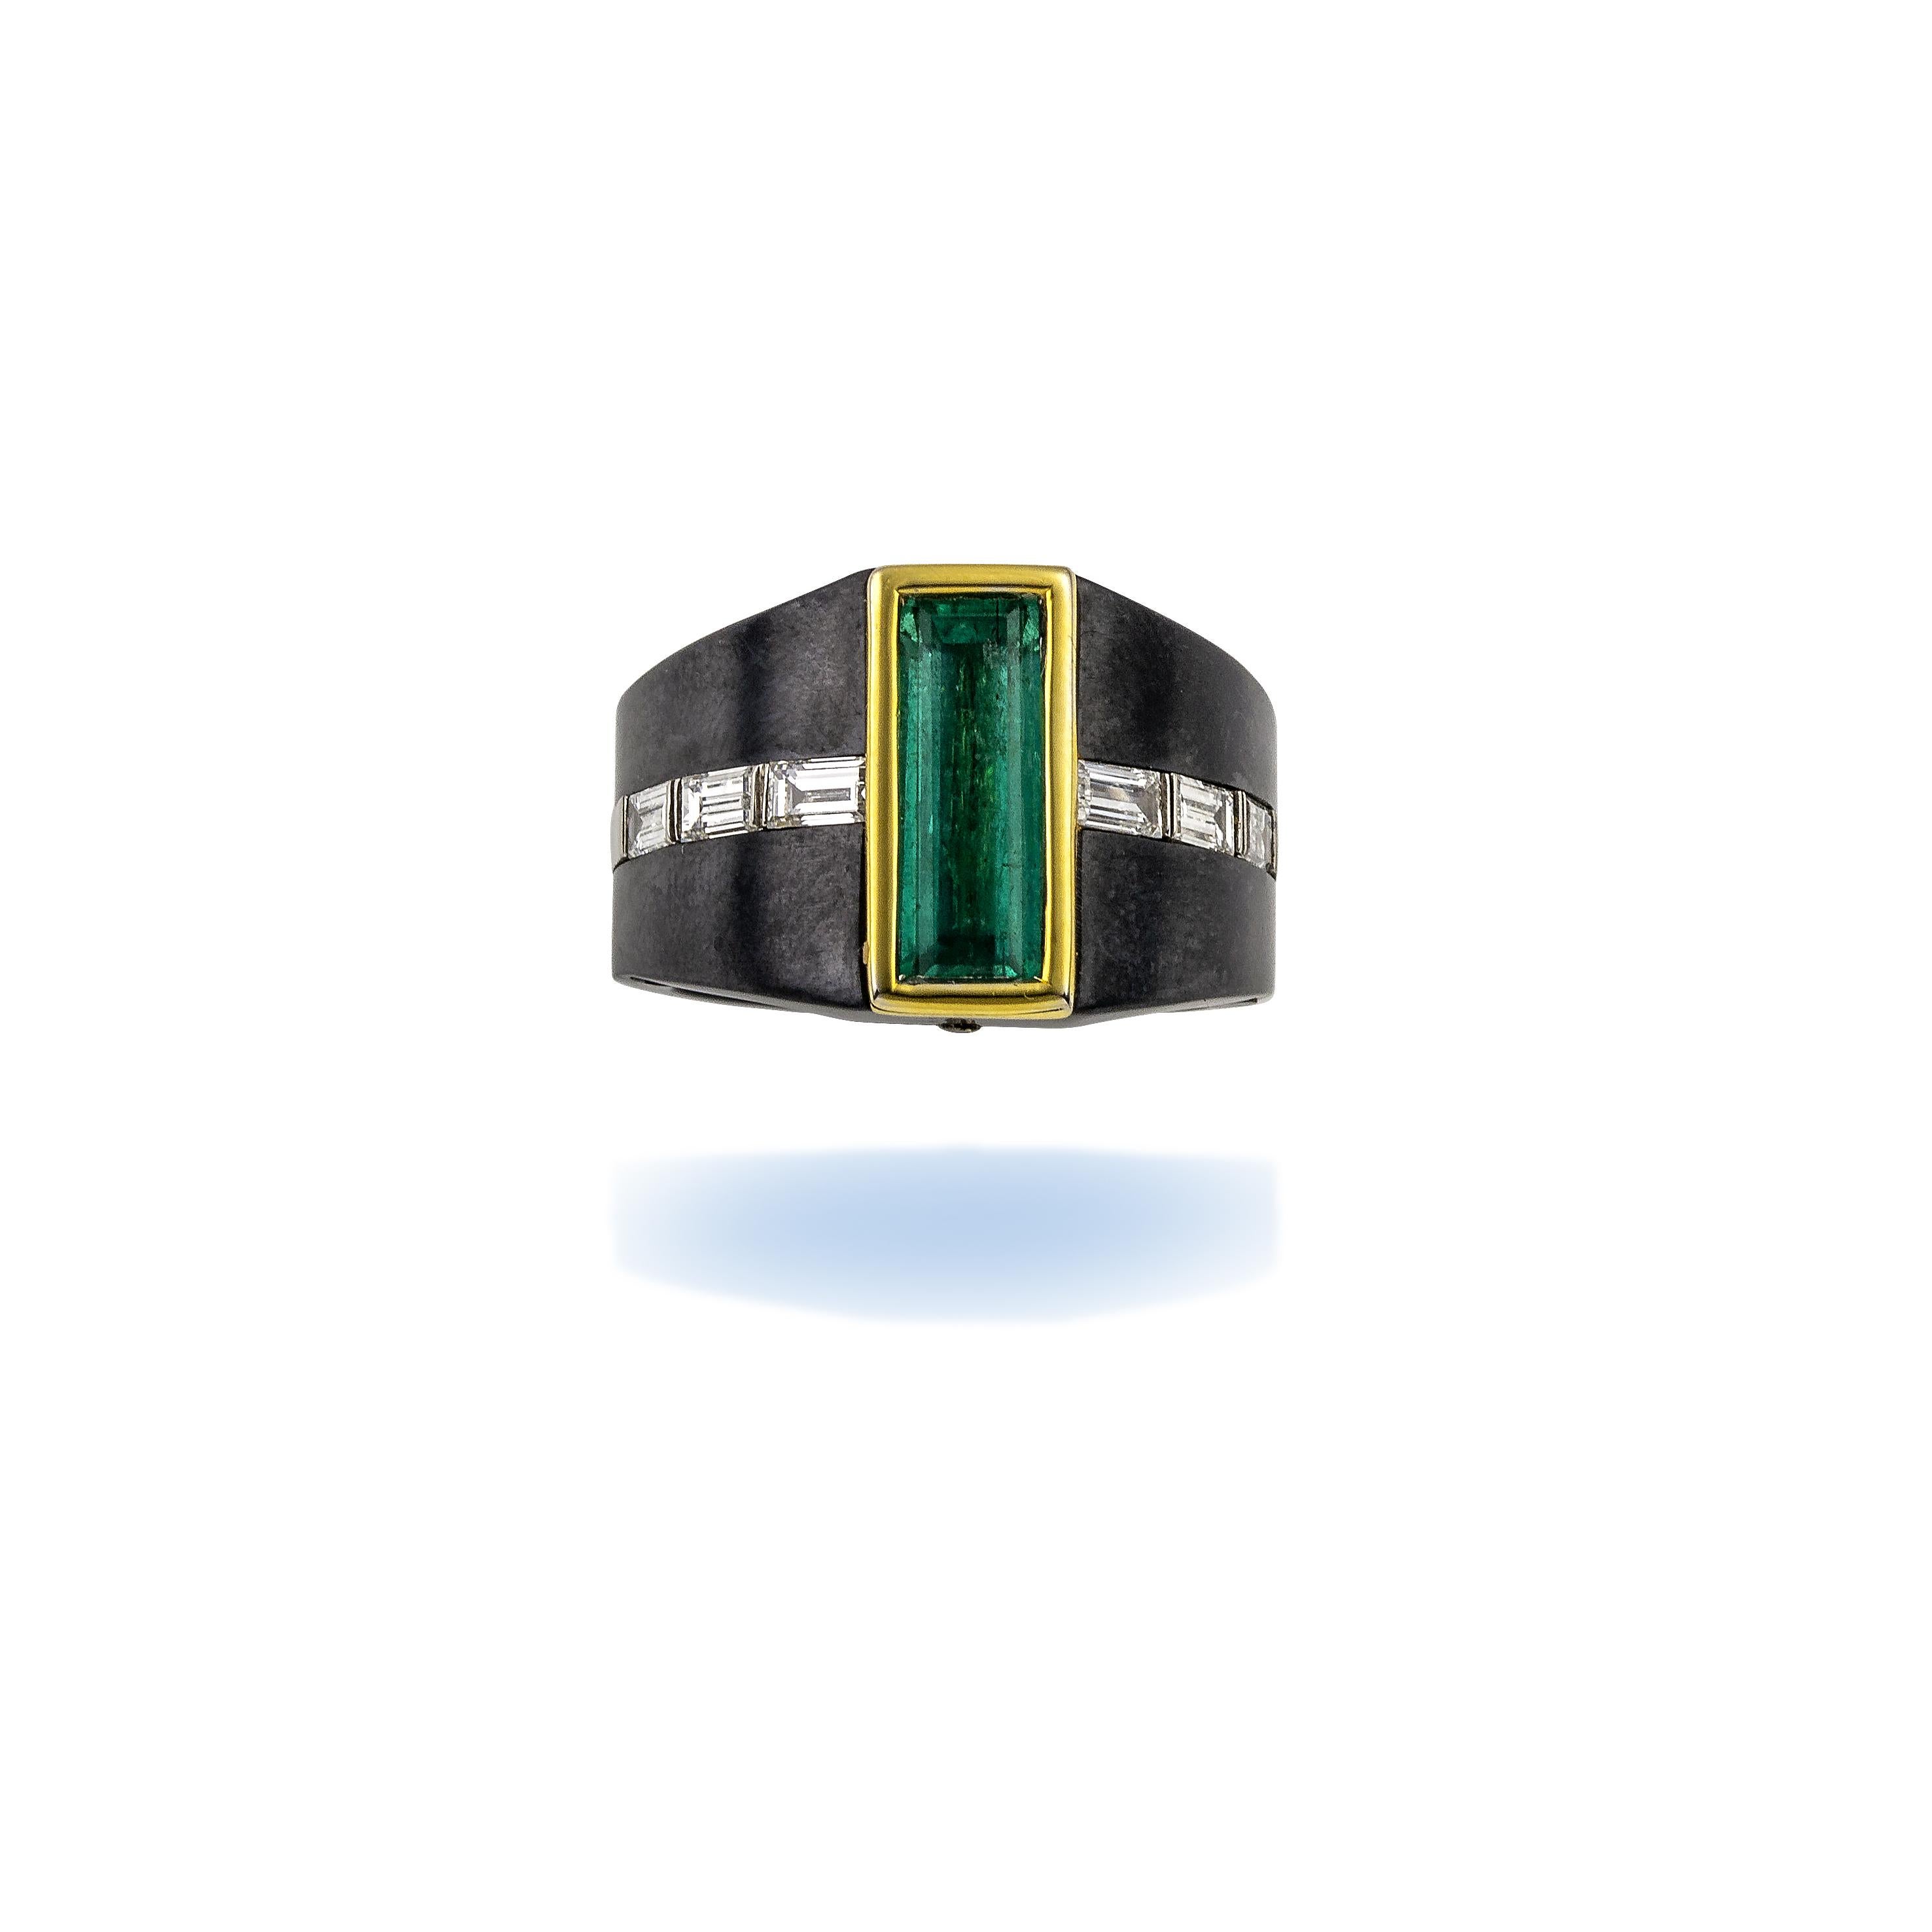 Modern Emerald Chevalier Ring by Vasilis Giampouras at Second Petale Gallery
A captivating unisex design that seamlessly blends elegance and modernity. Crafted with precision, this ring features an impressive combination of Black Titanium, Gold and